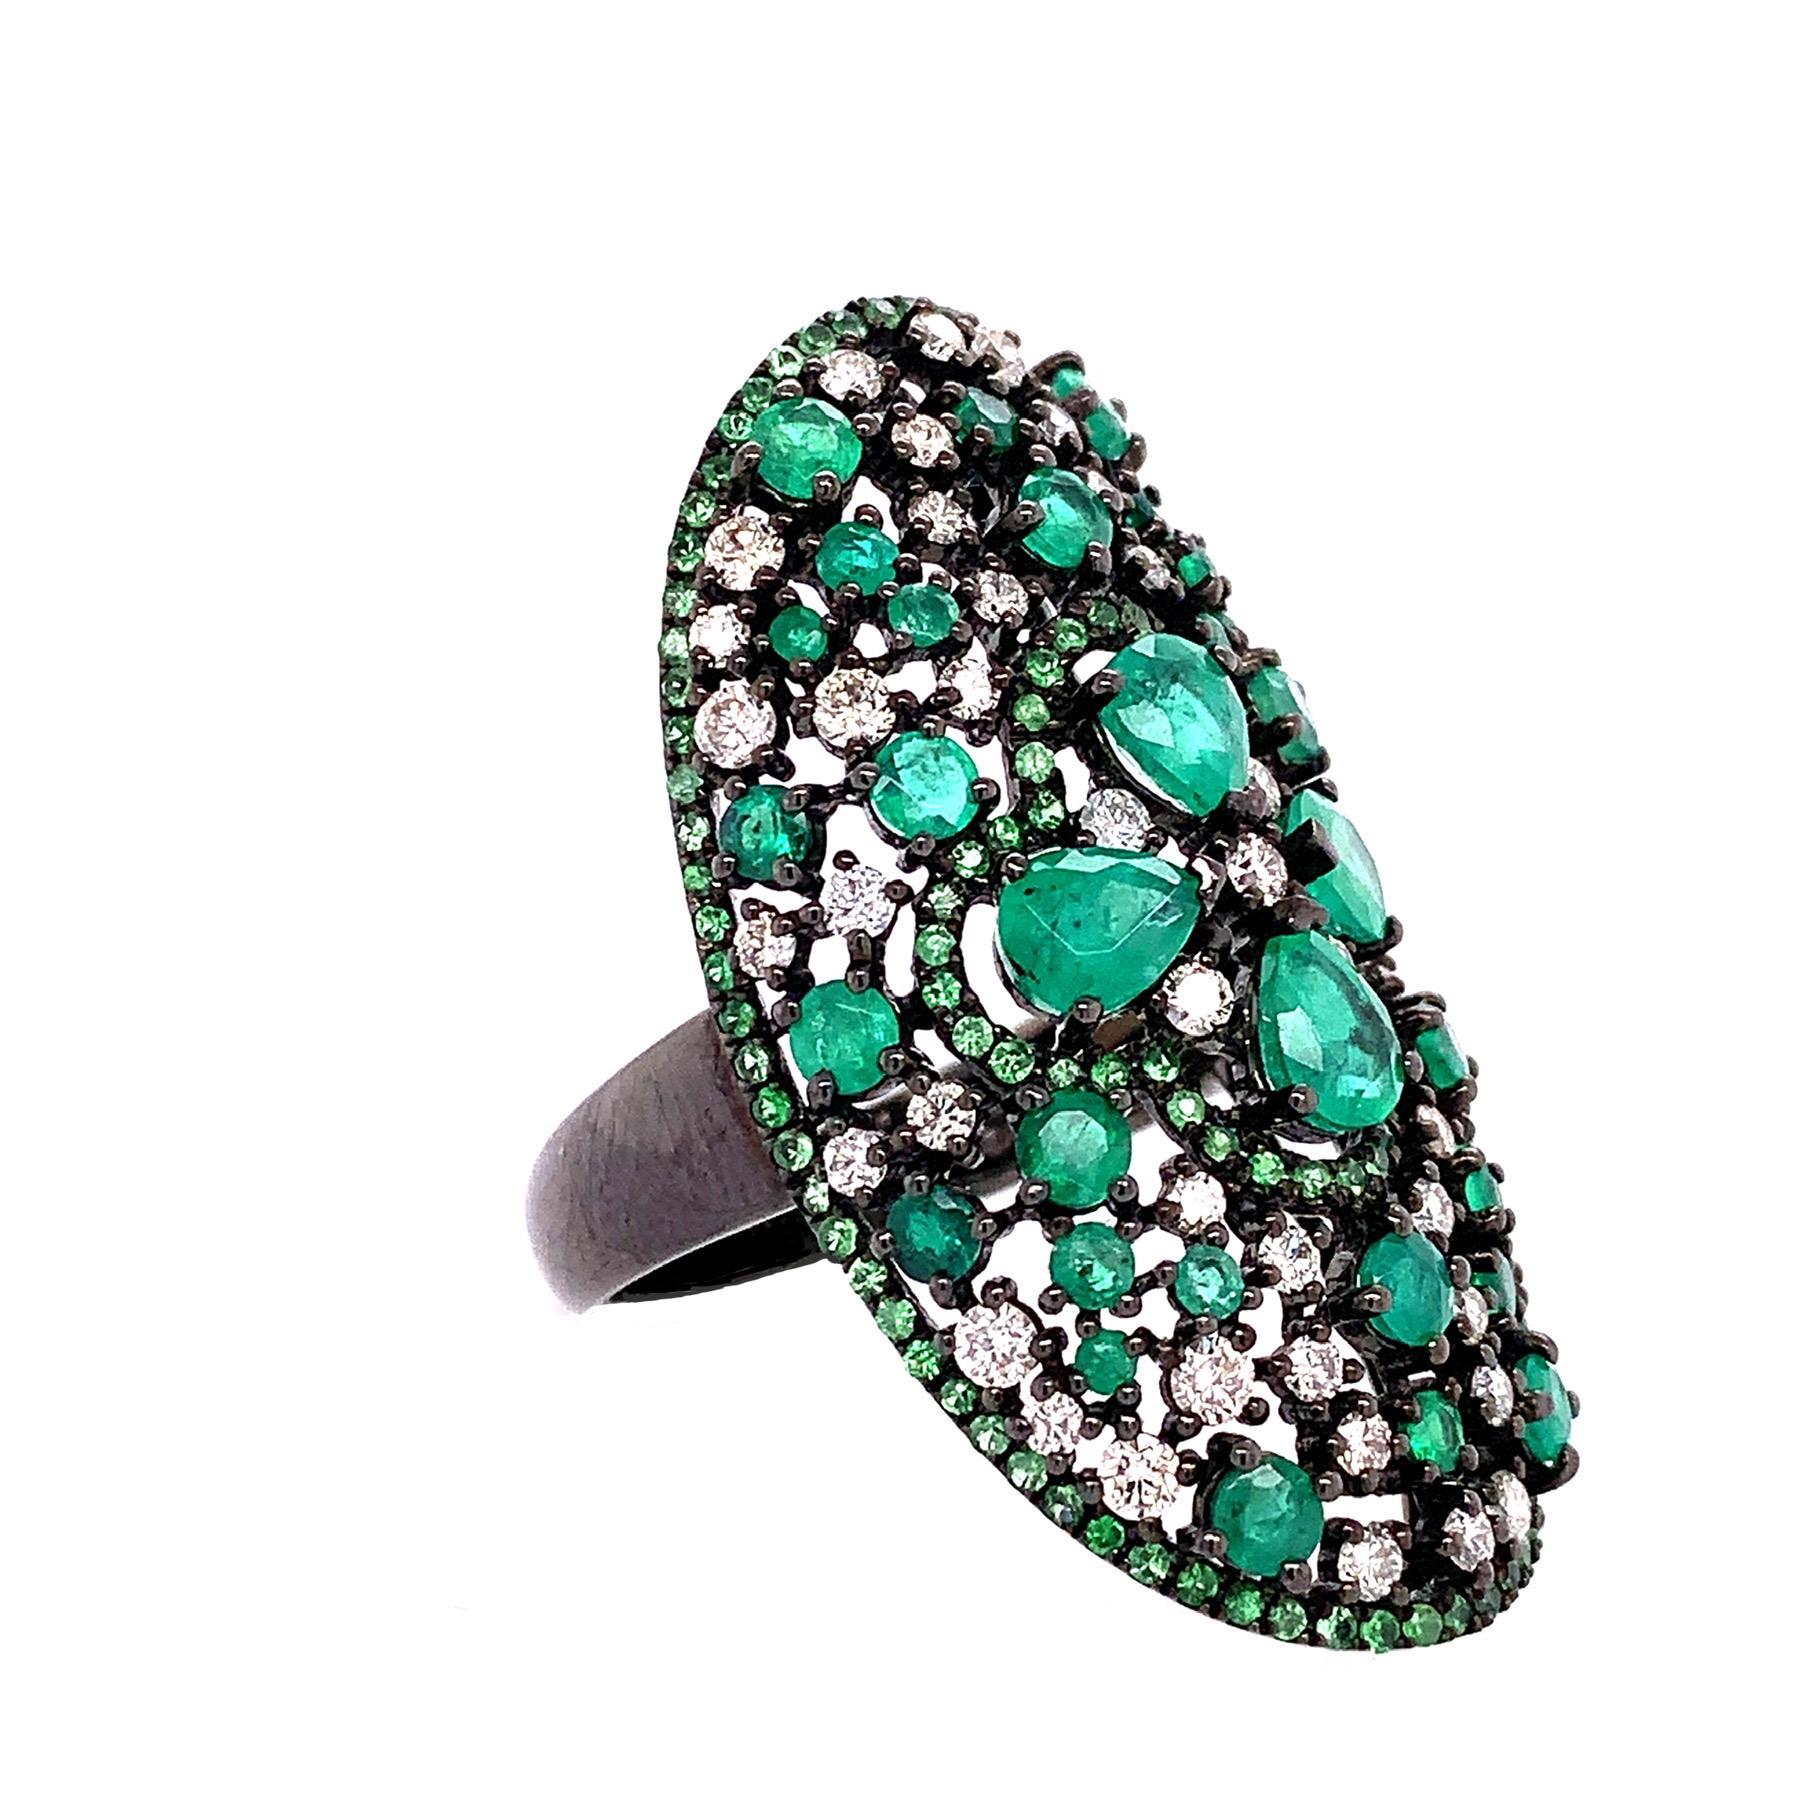 18K Black Rhodium Gold
Ring size: US 6 size.
Emerald: 2.76ct total weight.
Green Garnet: 0.53ct total weight.
Diamond: 0.92ct total weight.
All Diamonds are G-H/SI stones.